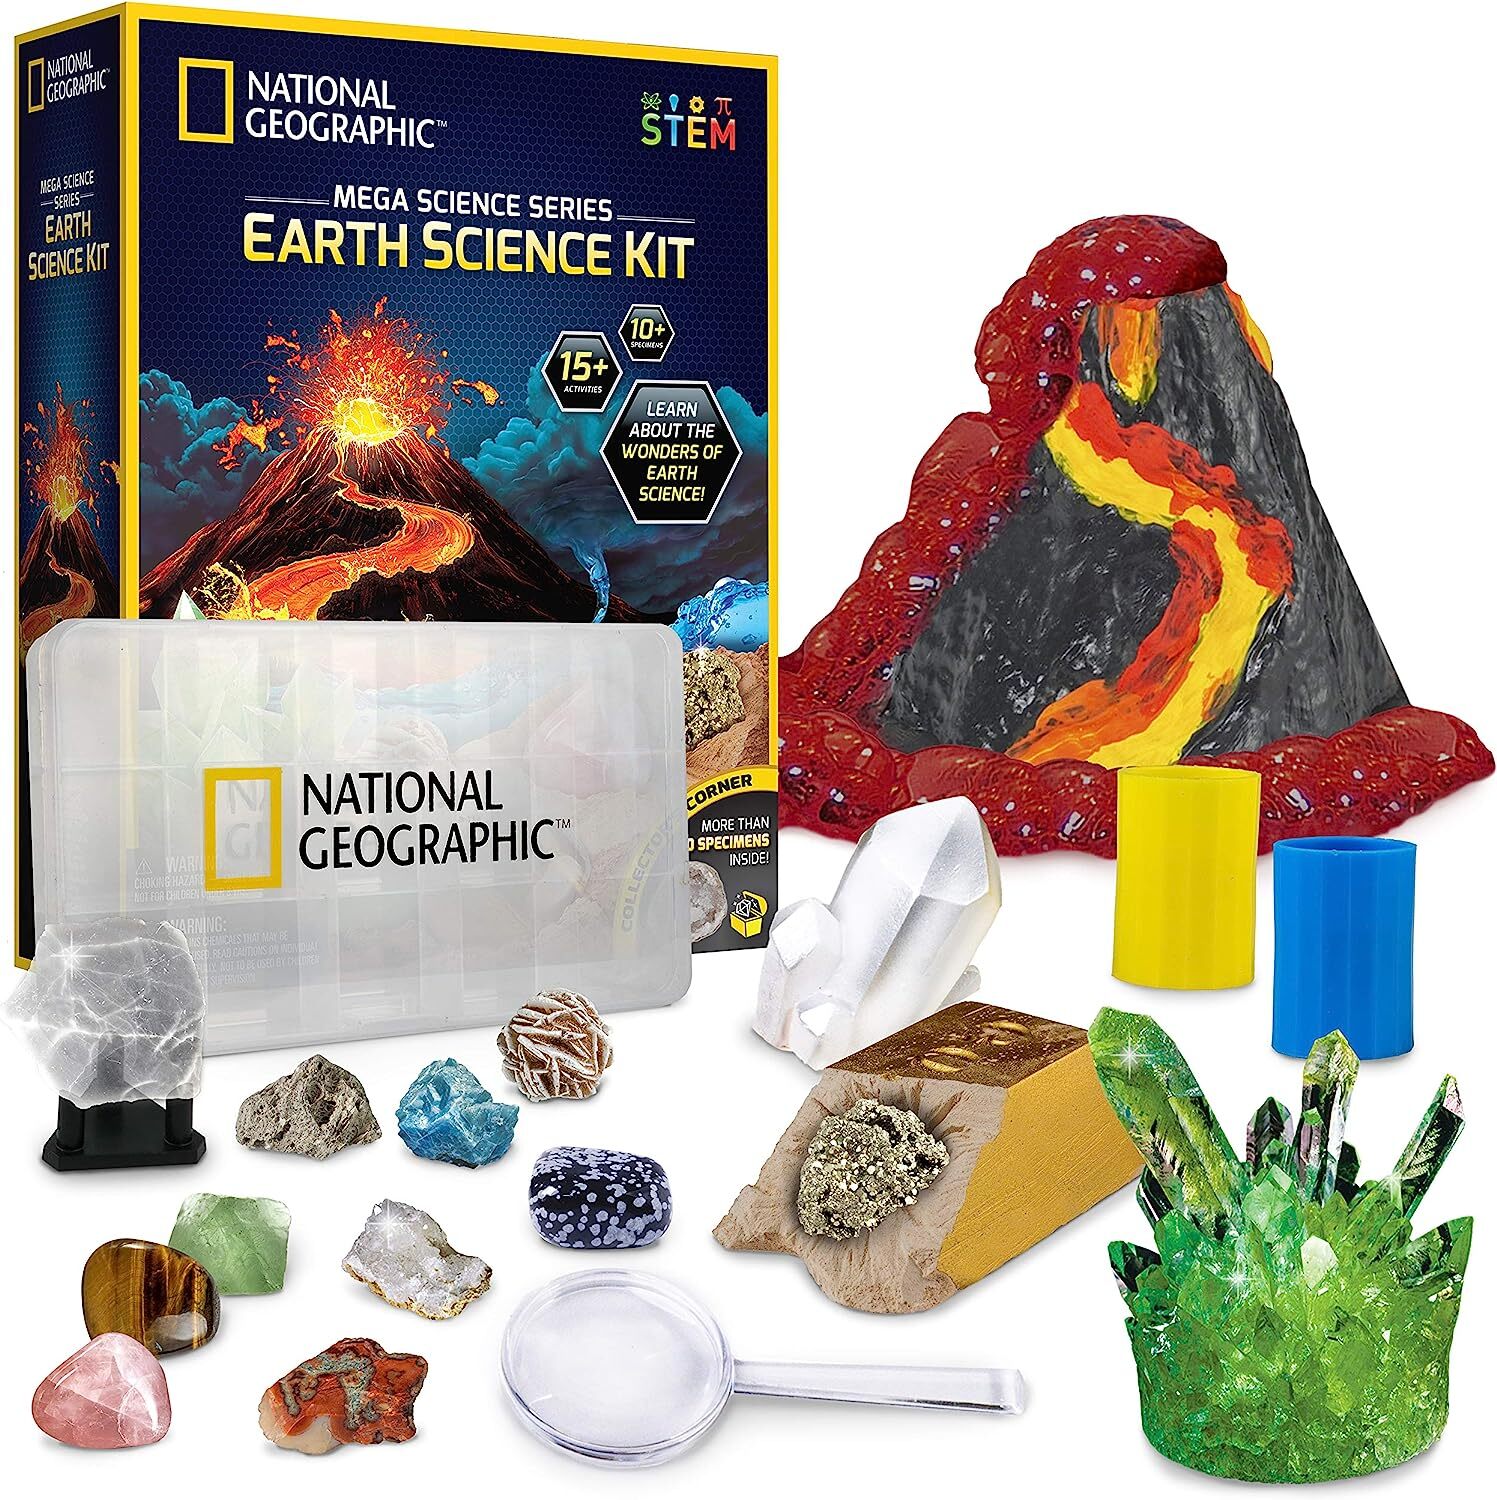 NATIONAL GEOGRAPHIC Earth Science Kit - Over 15 Science